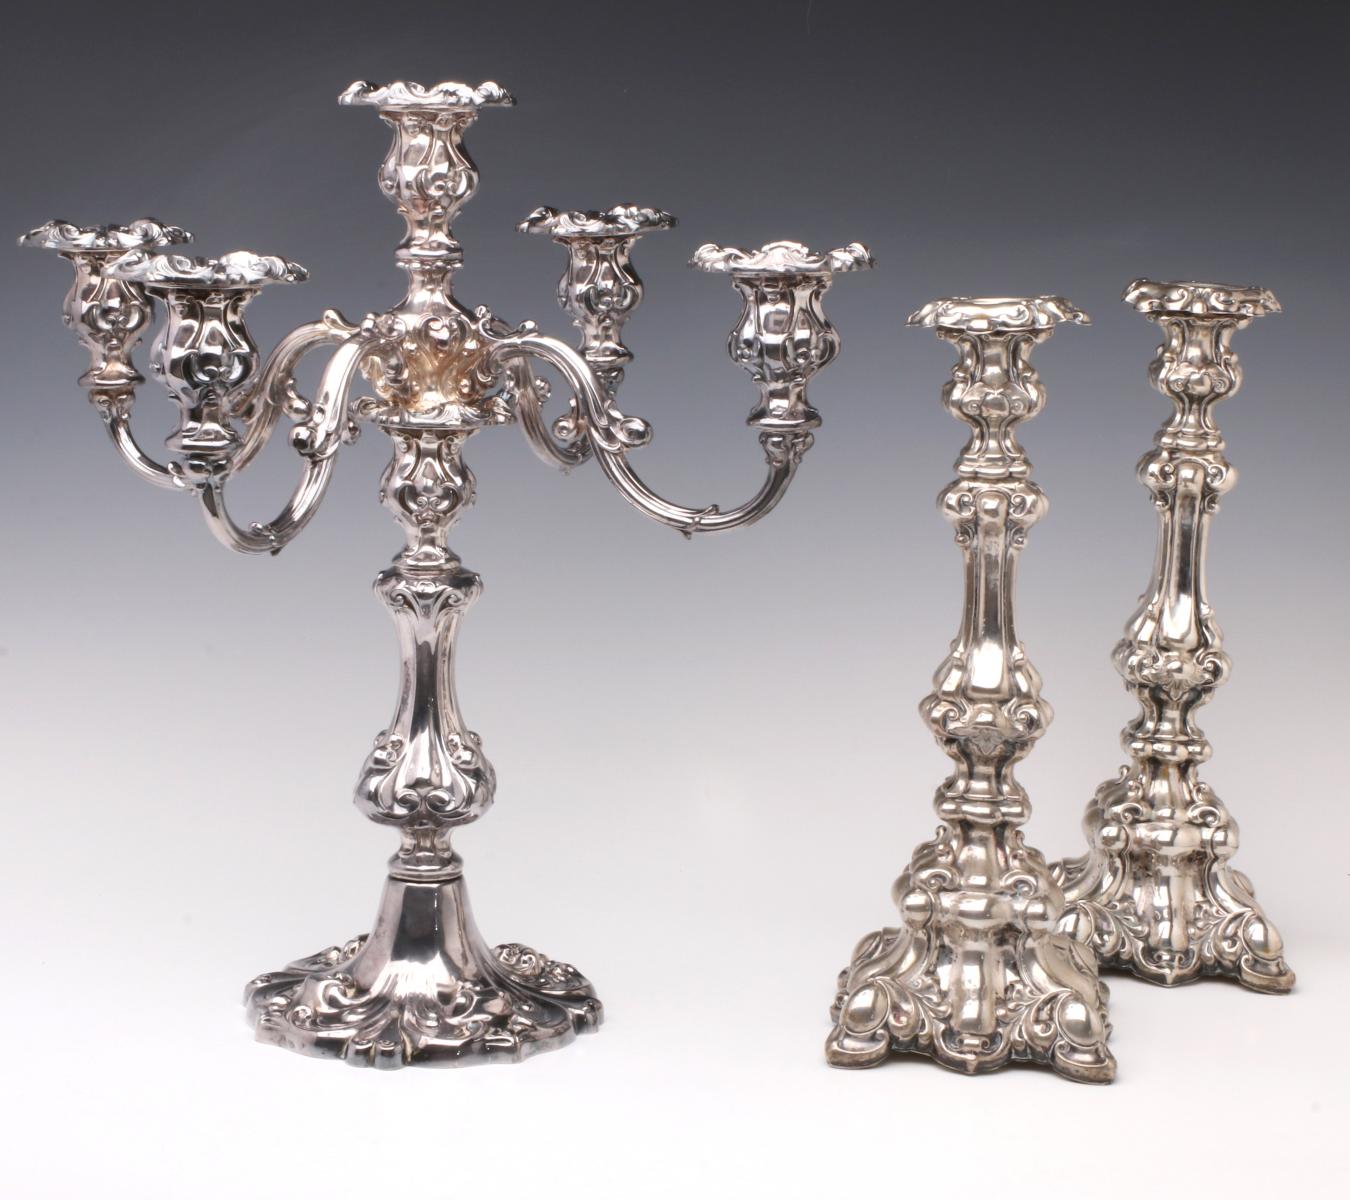 WALLACE PLATED CANDELABRA 8318, WITH SIMILAR PAIR